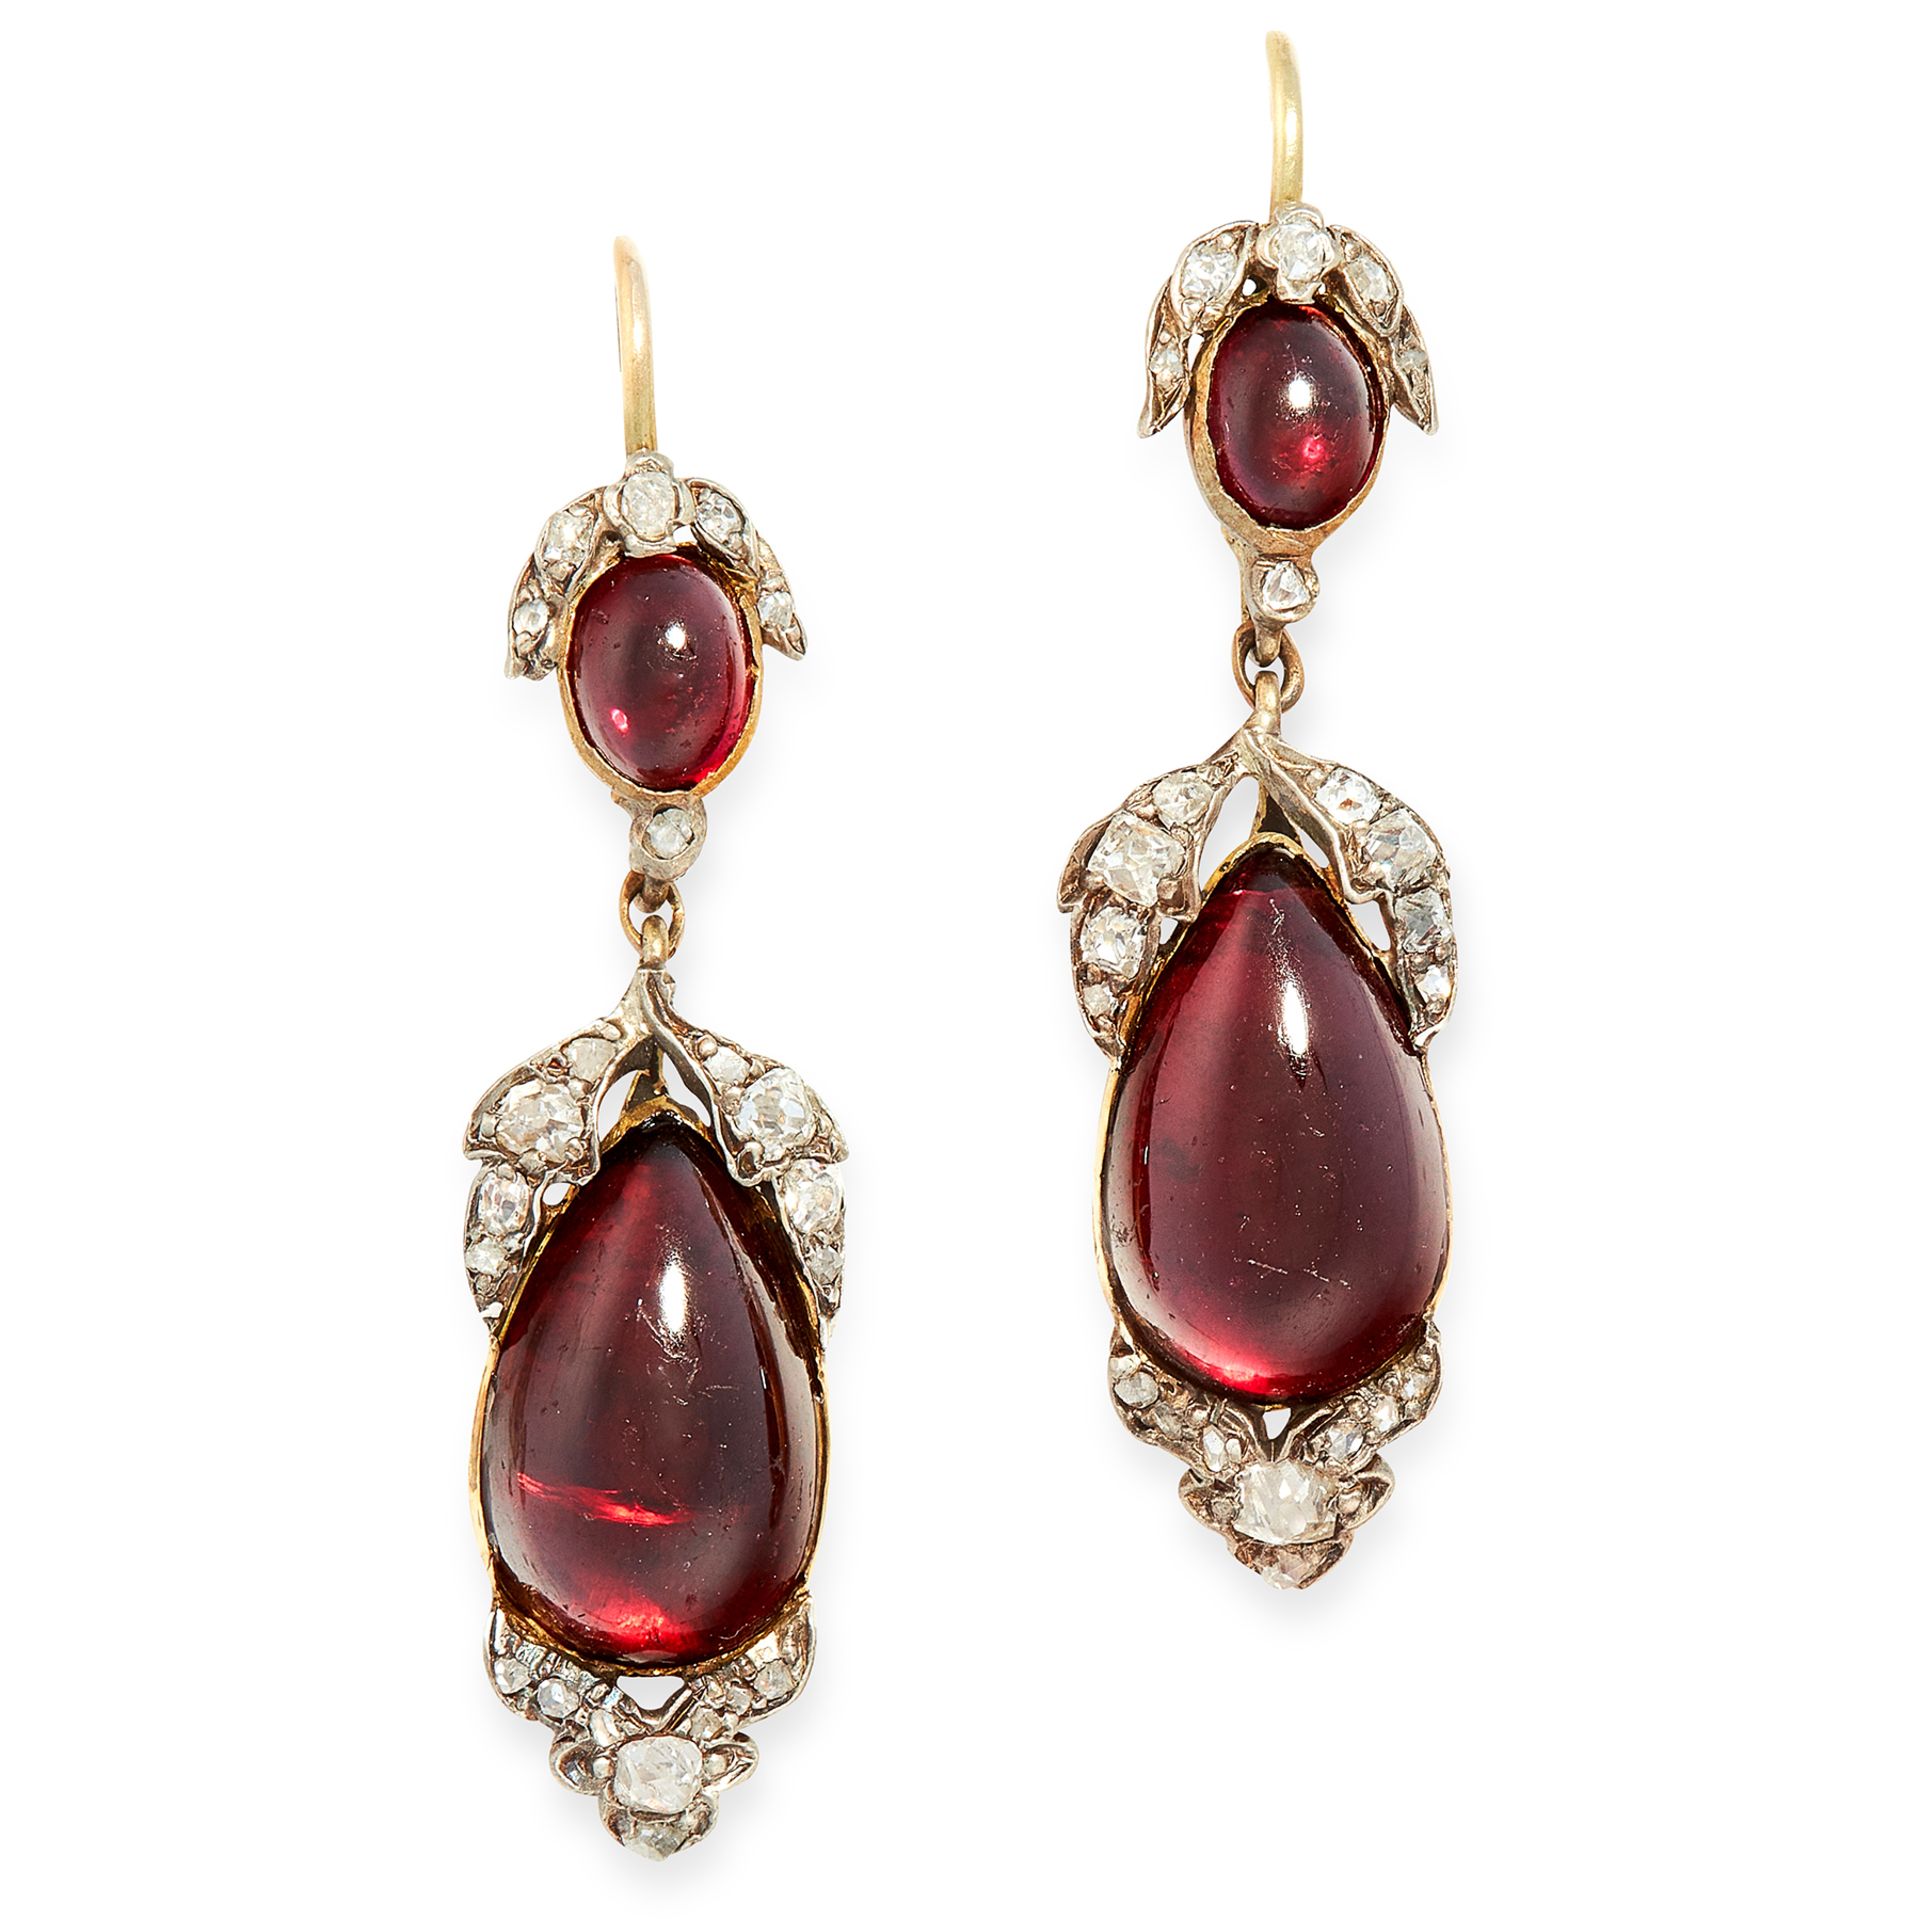 A PAIR OF ANTIQUE GARNET AND DIAMOND DROP EARRINGS in yellow gold and silver, each formed of a